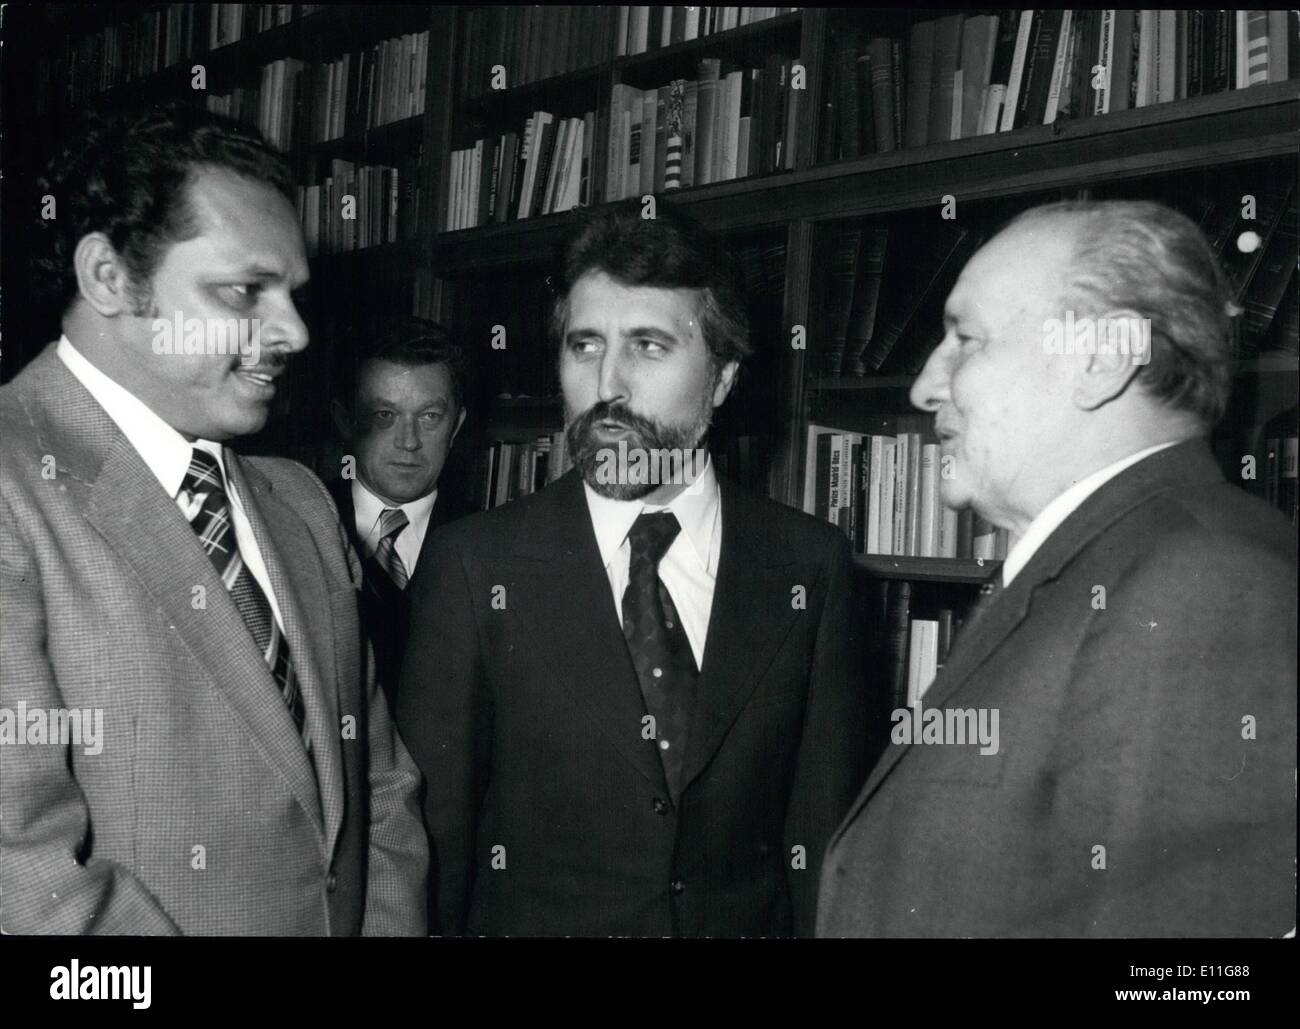 Jan. 01, 1978 - Prime Minister of the People's democratic republic of Yemen in Hungary: First secretary of the Central Committee of the Hungarian Socialist Workers' Pary Janos Kadar/right/received here today at Prime Minister of the People's Democratic Republic of Yemen Ali Nasser Mohamed/left/. In the centre: the interpreter. Stock Photo